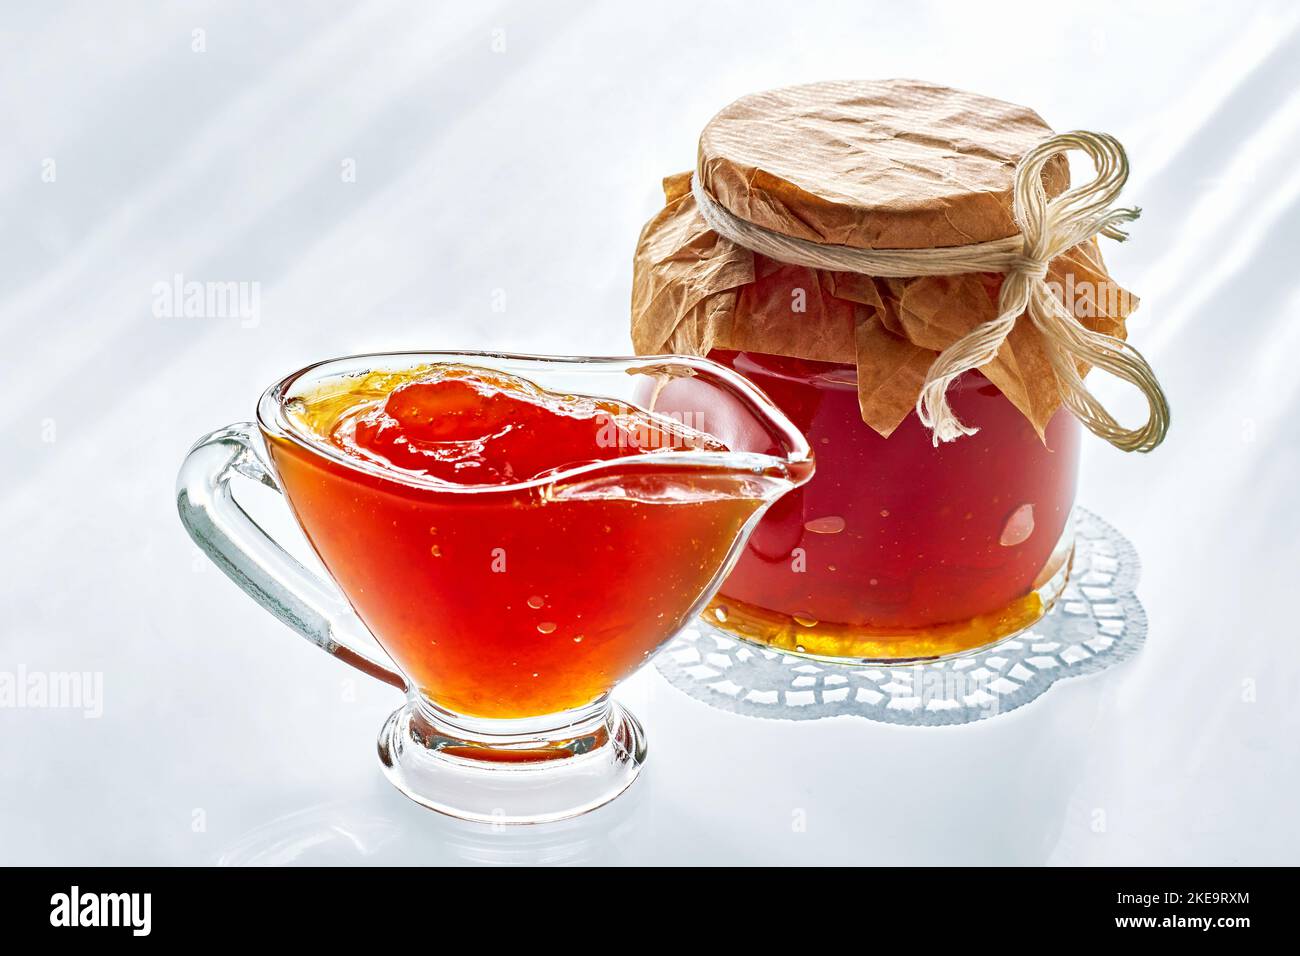 Sweet orange color fruit jam in a glass gravy boat and in a jar on a light morning background Stock Photo